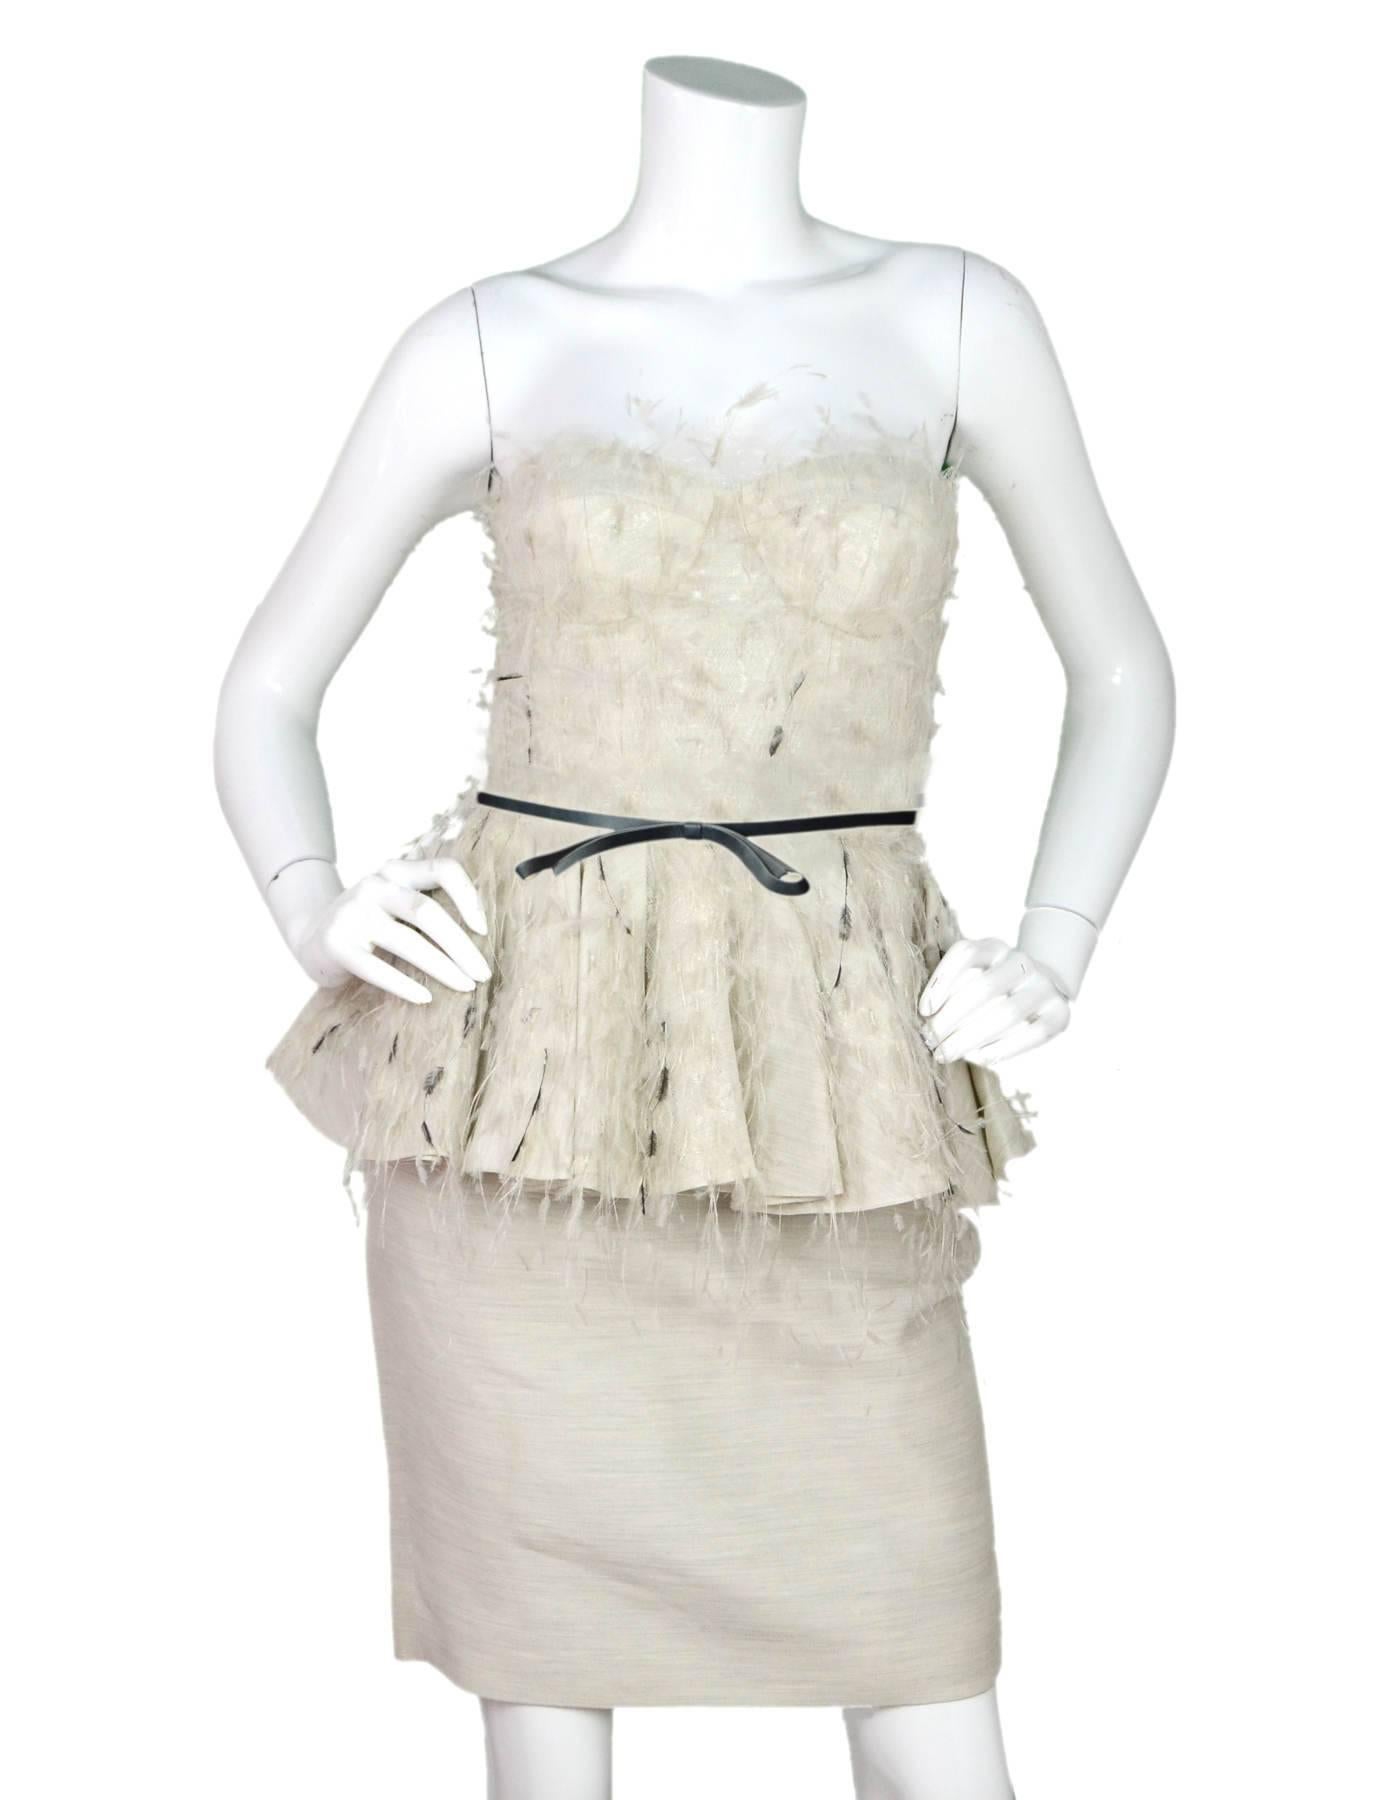 Jason Wu Grey Feather Dress Sz 2

Features lace bust and peplum skirt

Made In: USA
Year Of Production: Spring 2012
Color: Grey
Composition: 73% cotton, 27% silk
Lining: Beige textile
Closure/Opening: Zip closure at back
Overall Condition: Excellent